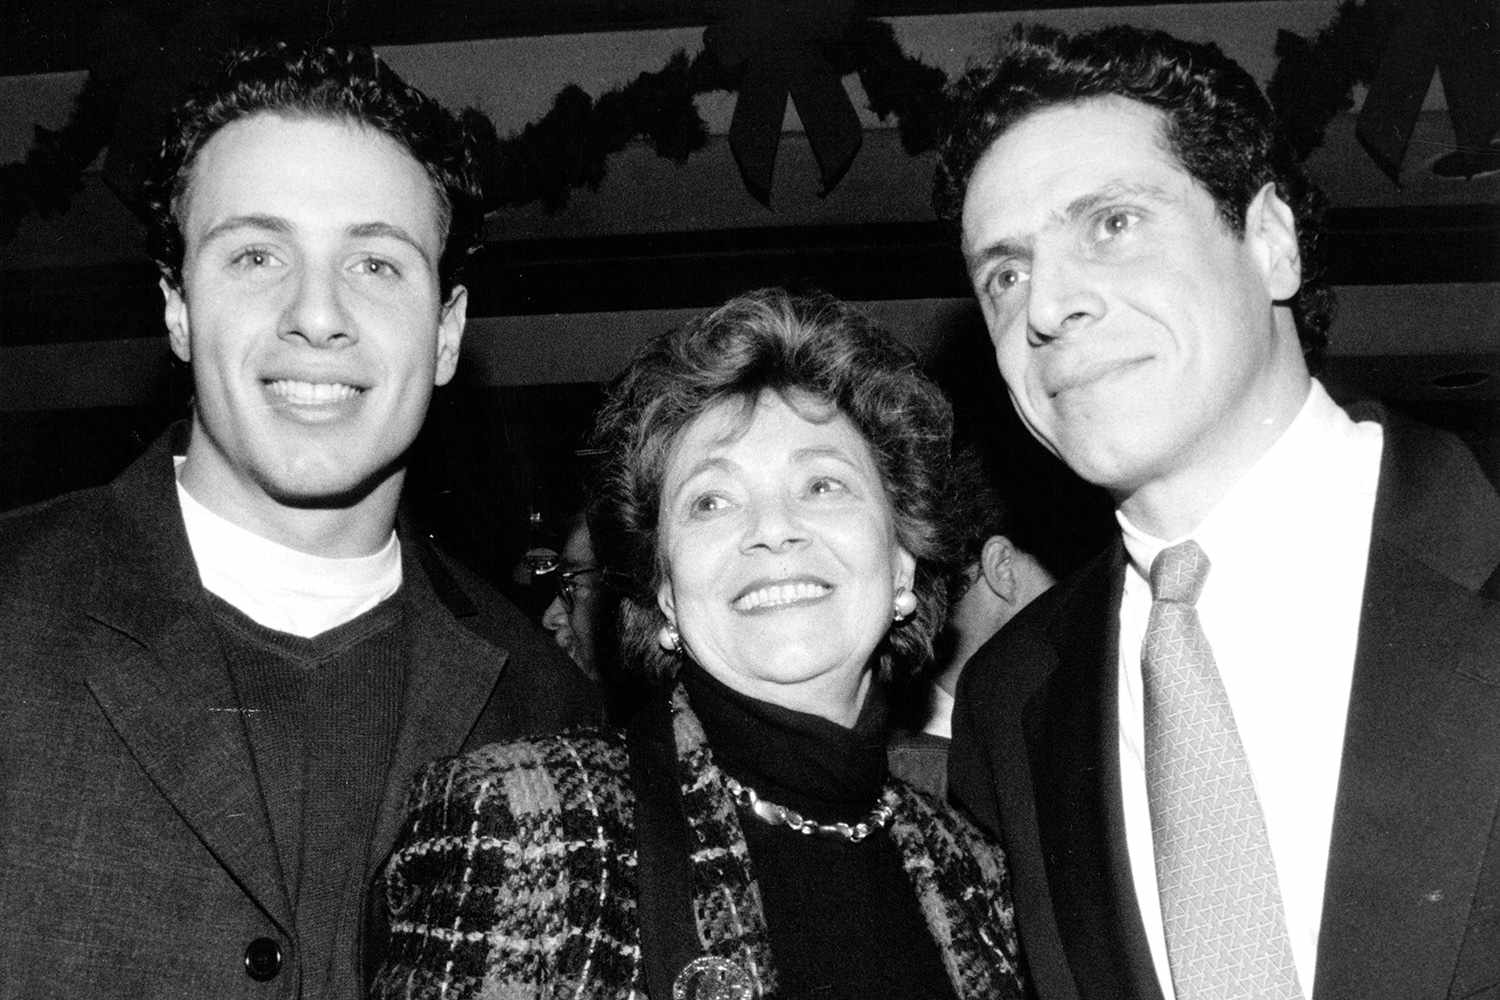 Chris Cuomo's mother and him and his sibling